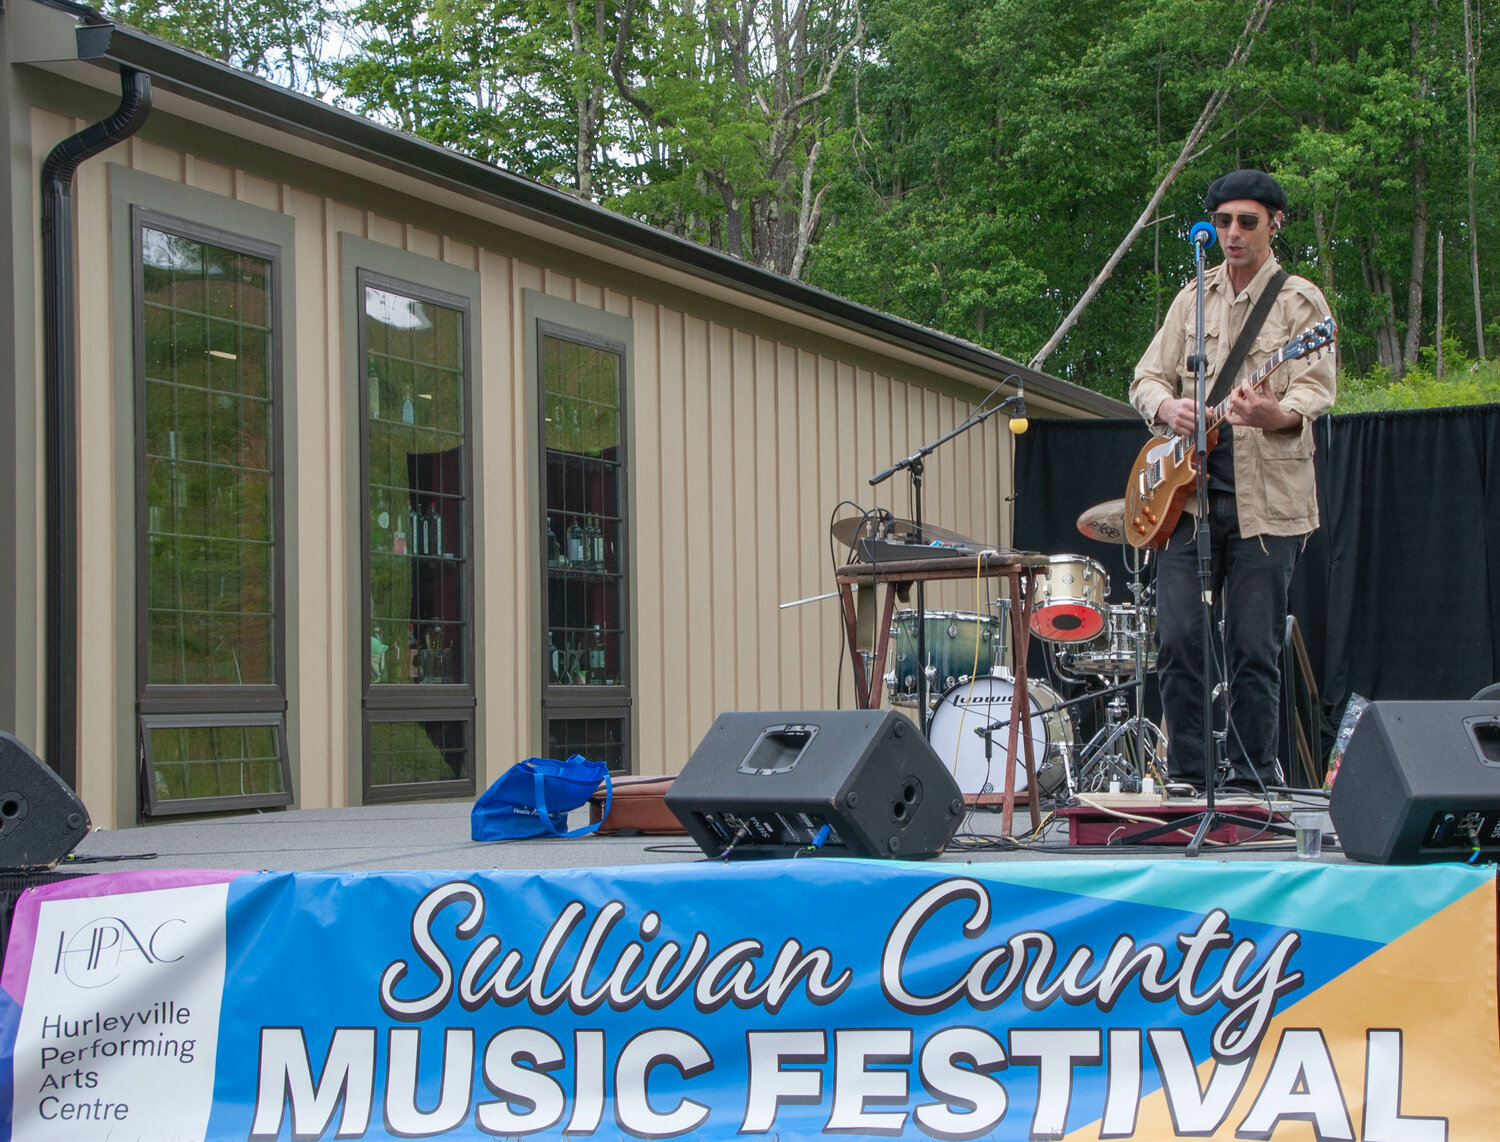 The Sullivan County Music Festival on the grounds of the Hurleyville Performing Arts Centre featured dozens of musicians, all performing original tunes.